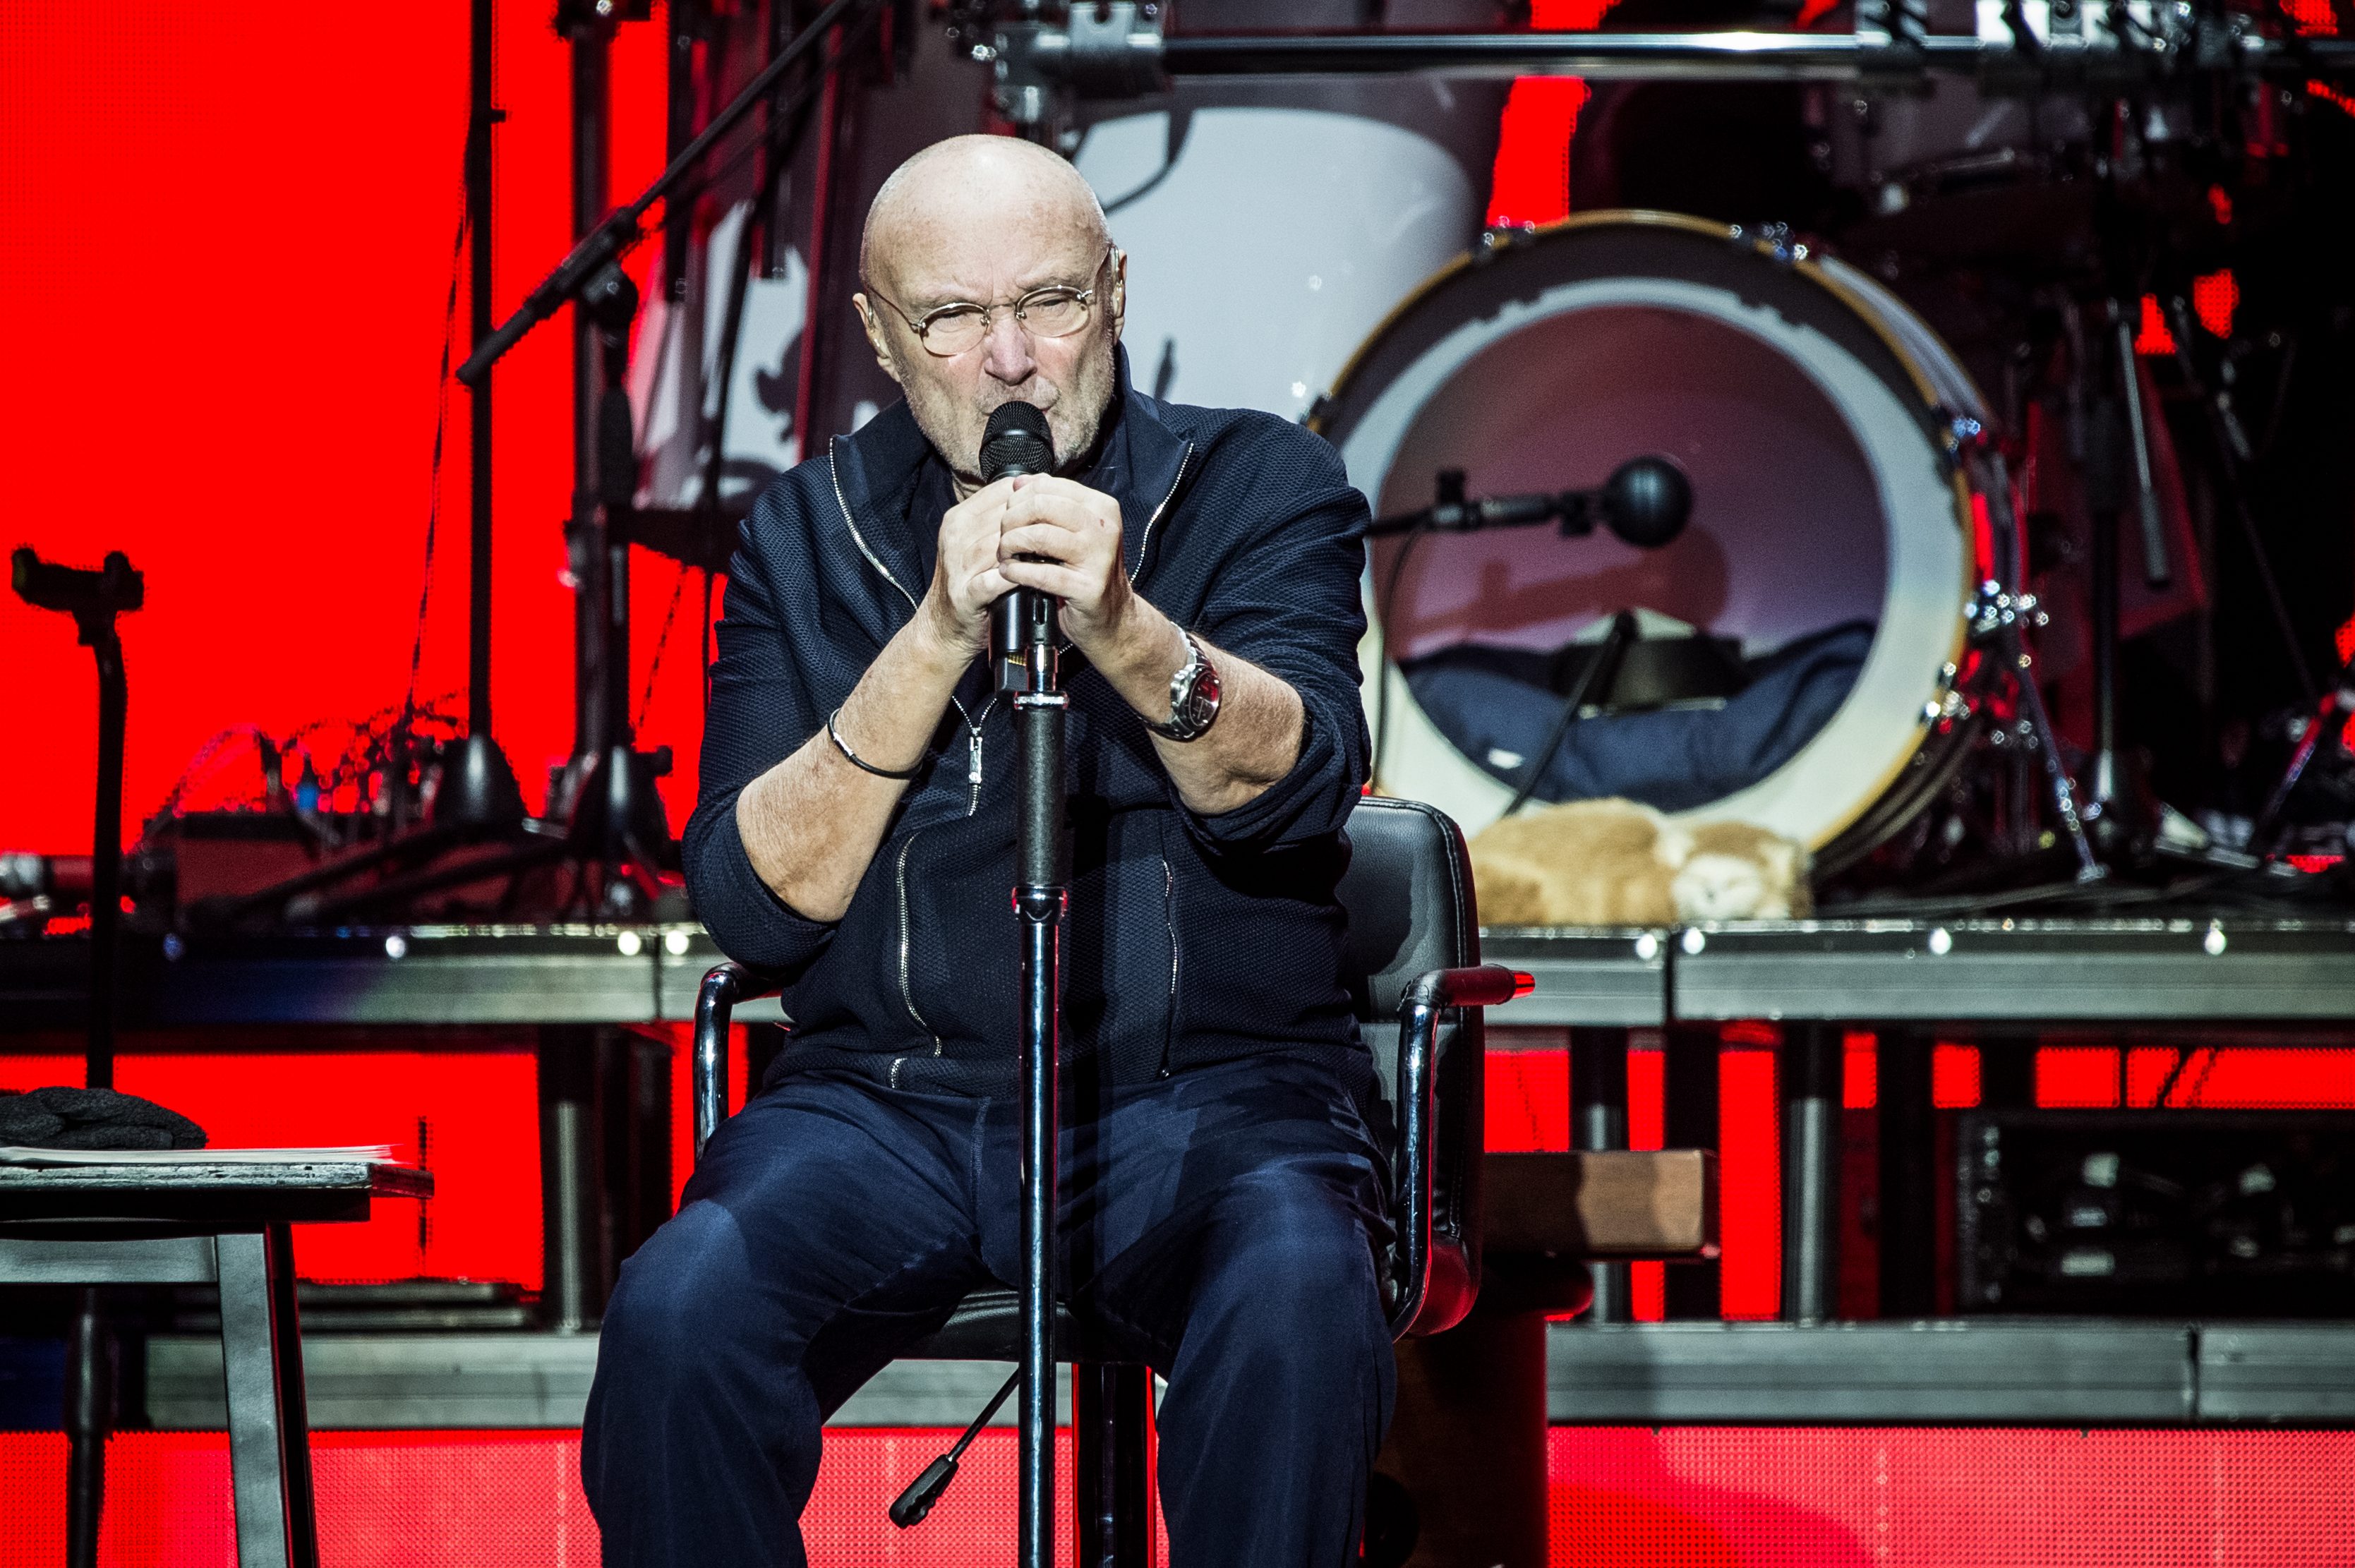 Phil Collins performs live on stage for the Italian date of his Still Not Dead Yet Live tour 2019. He currently cannot drum and sits during his concert performances.